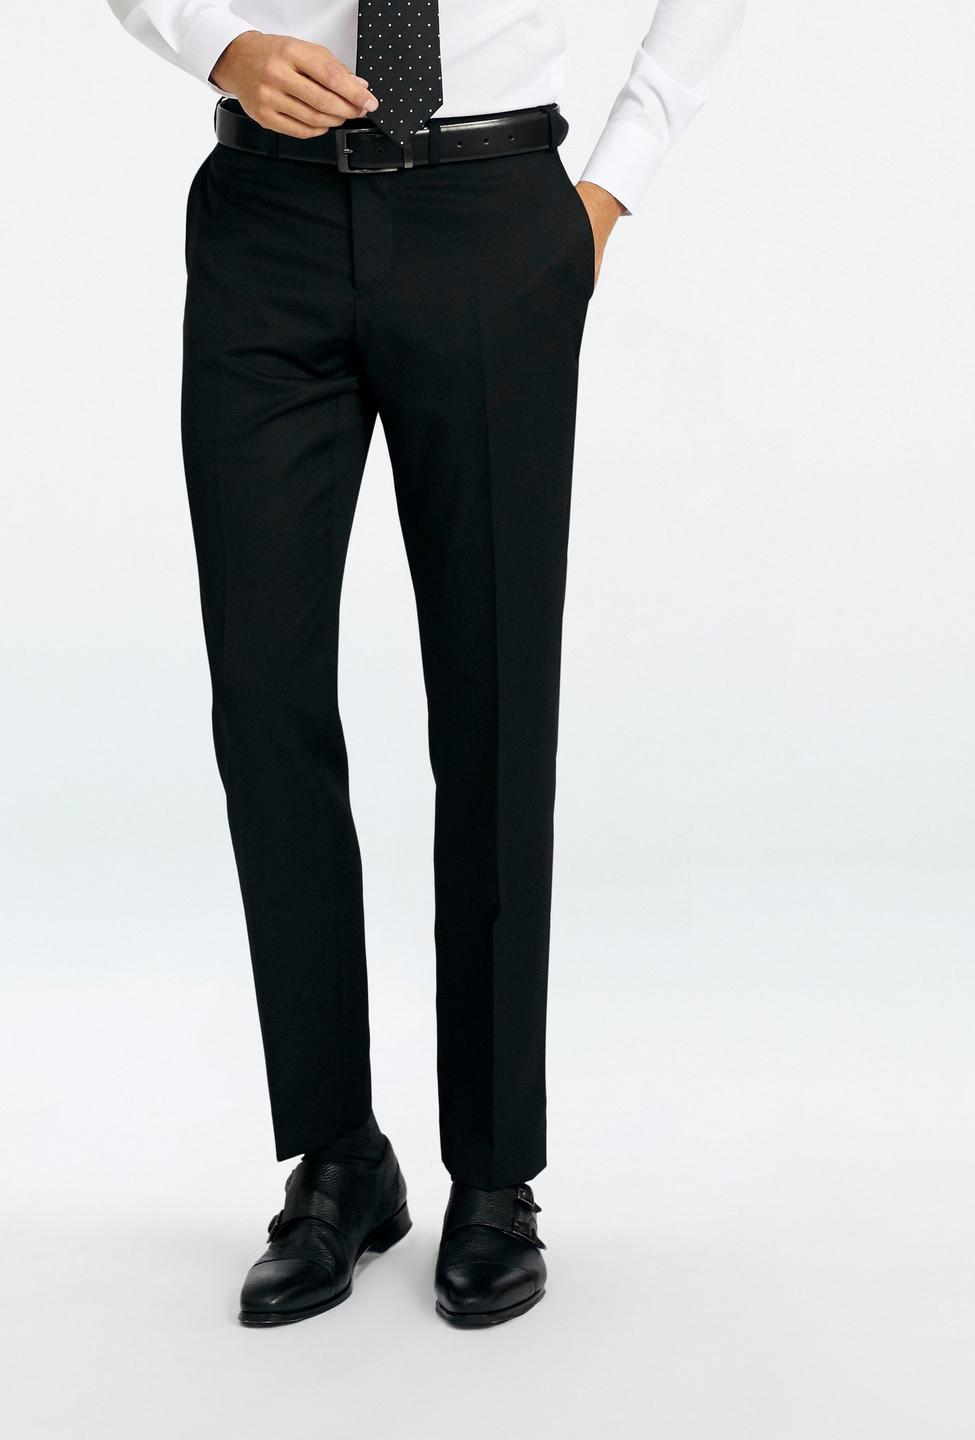 Black pants - Hereford Solid Design from Premium Indochino Collection